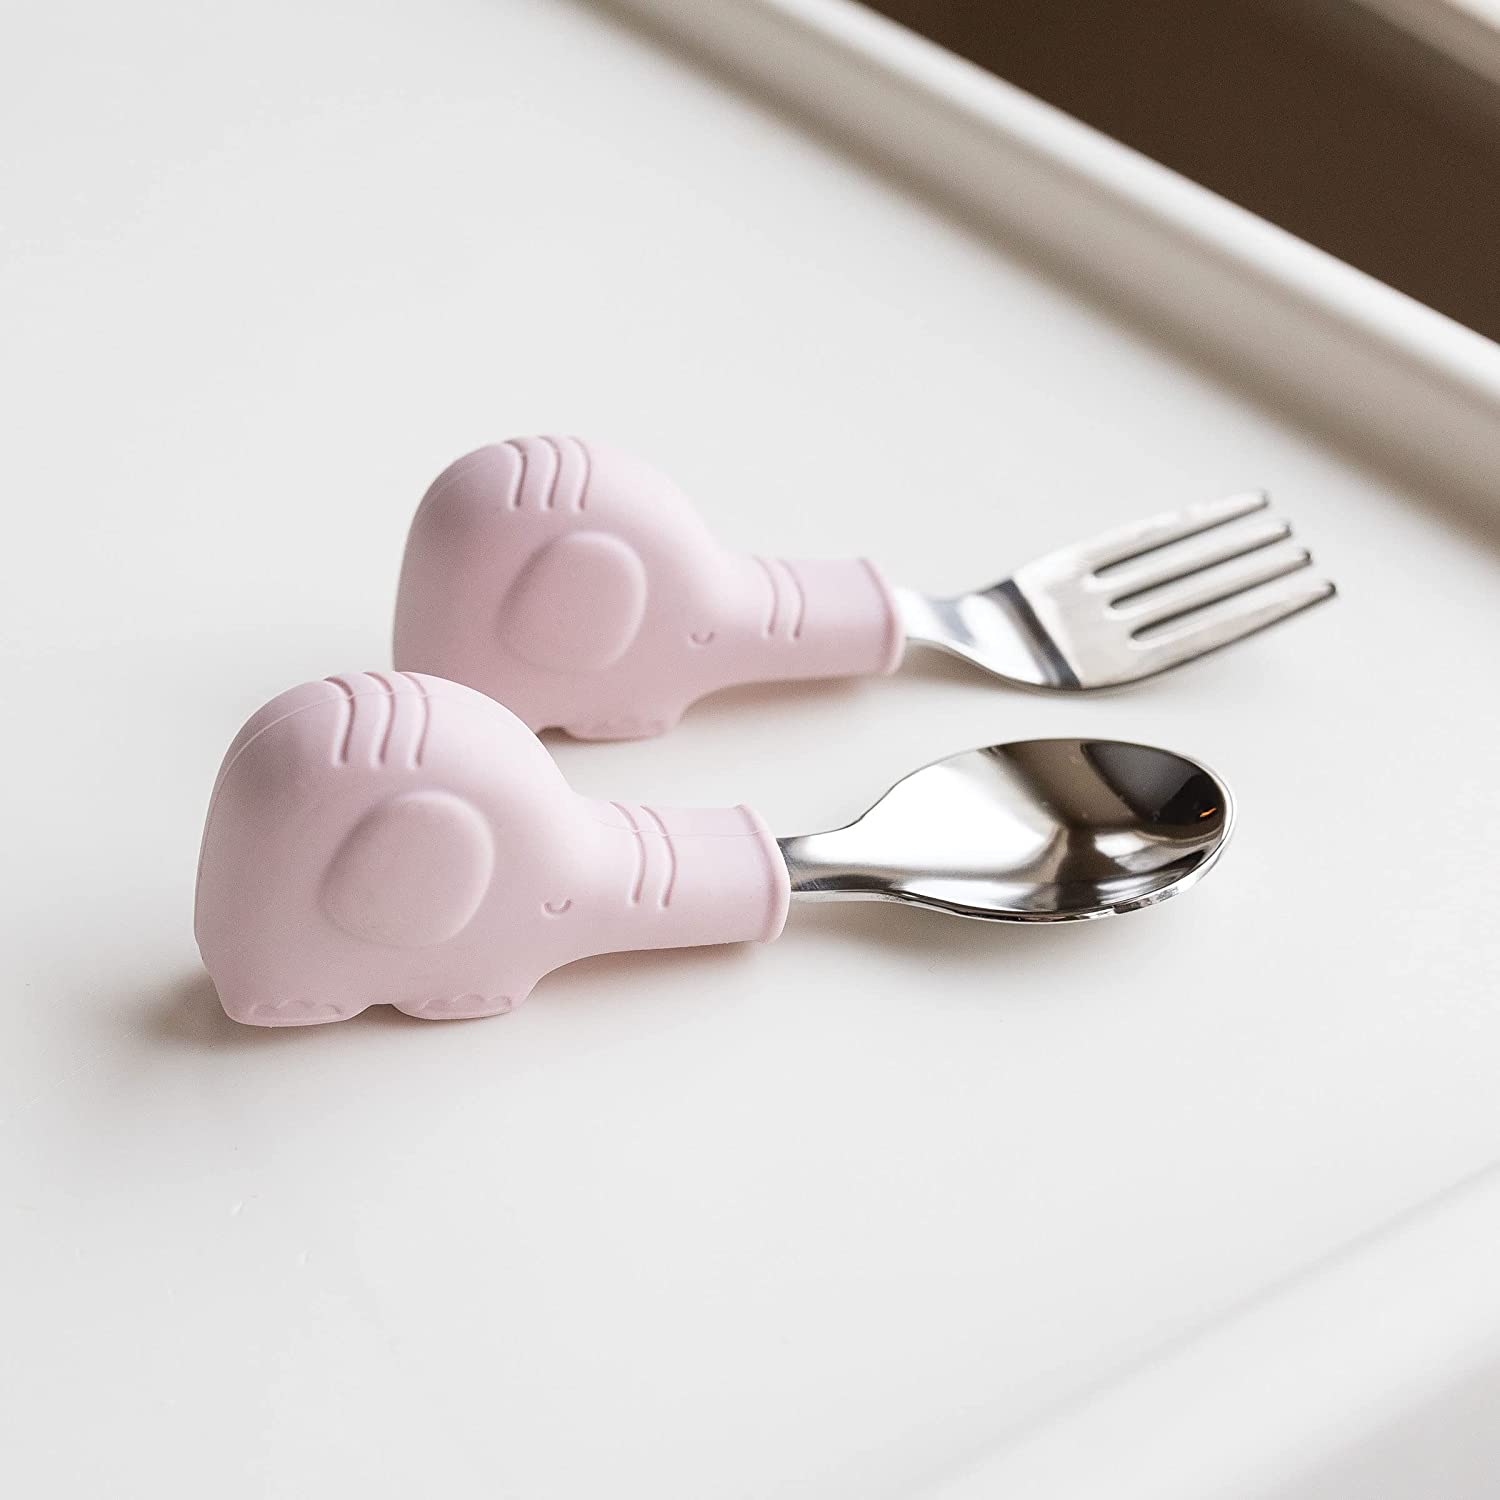 Tiny Twinkle - Silicone Stainless Training Utensils - Pink Elephant